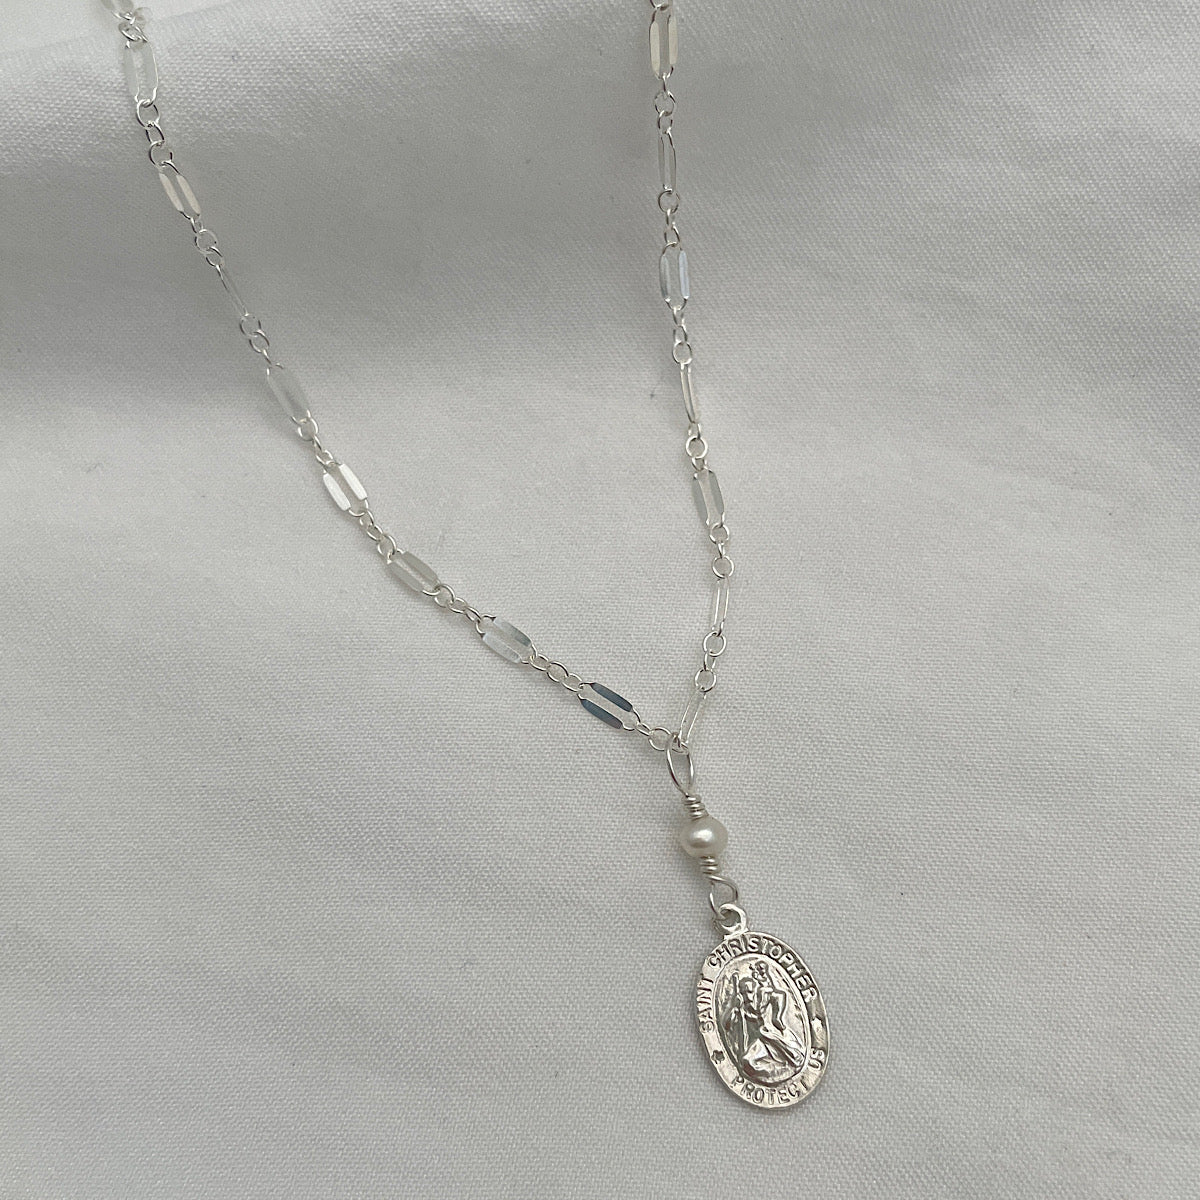 St Christopher Travelers Dainty Necklace